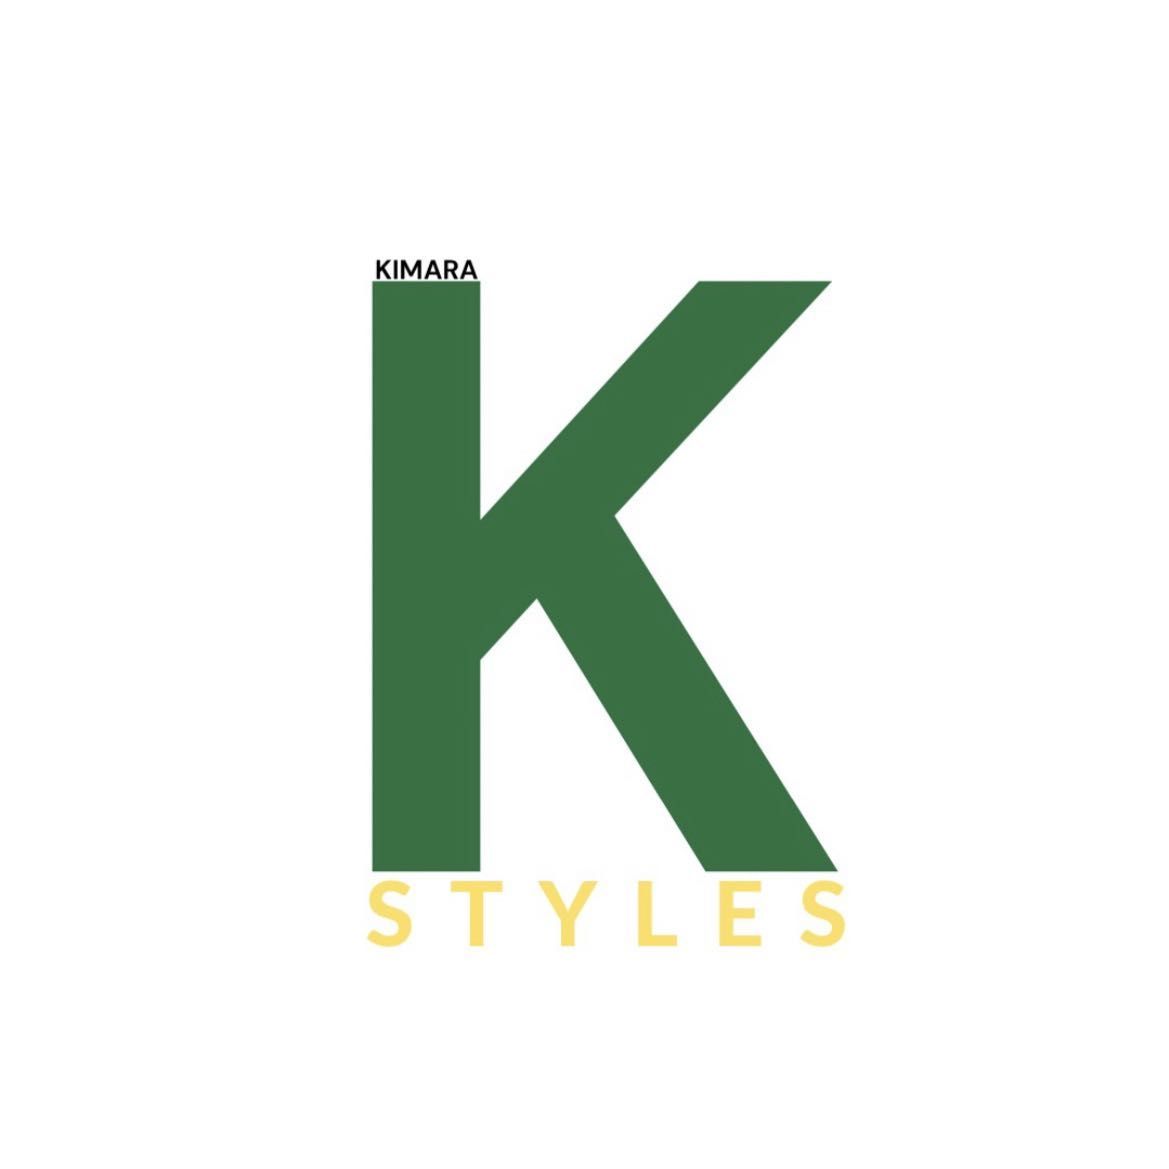 Kimarastyles, 16151 Cairnway Dr, Suite 107G, 107 G, Houston, 77084